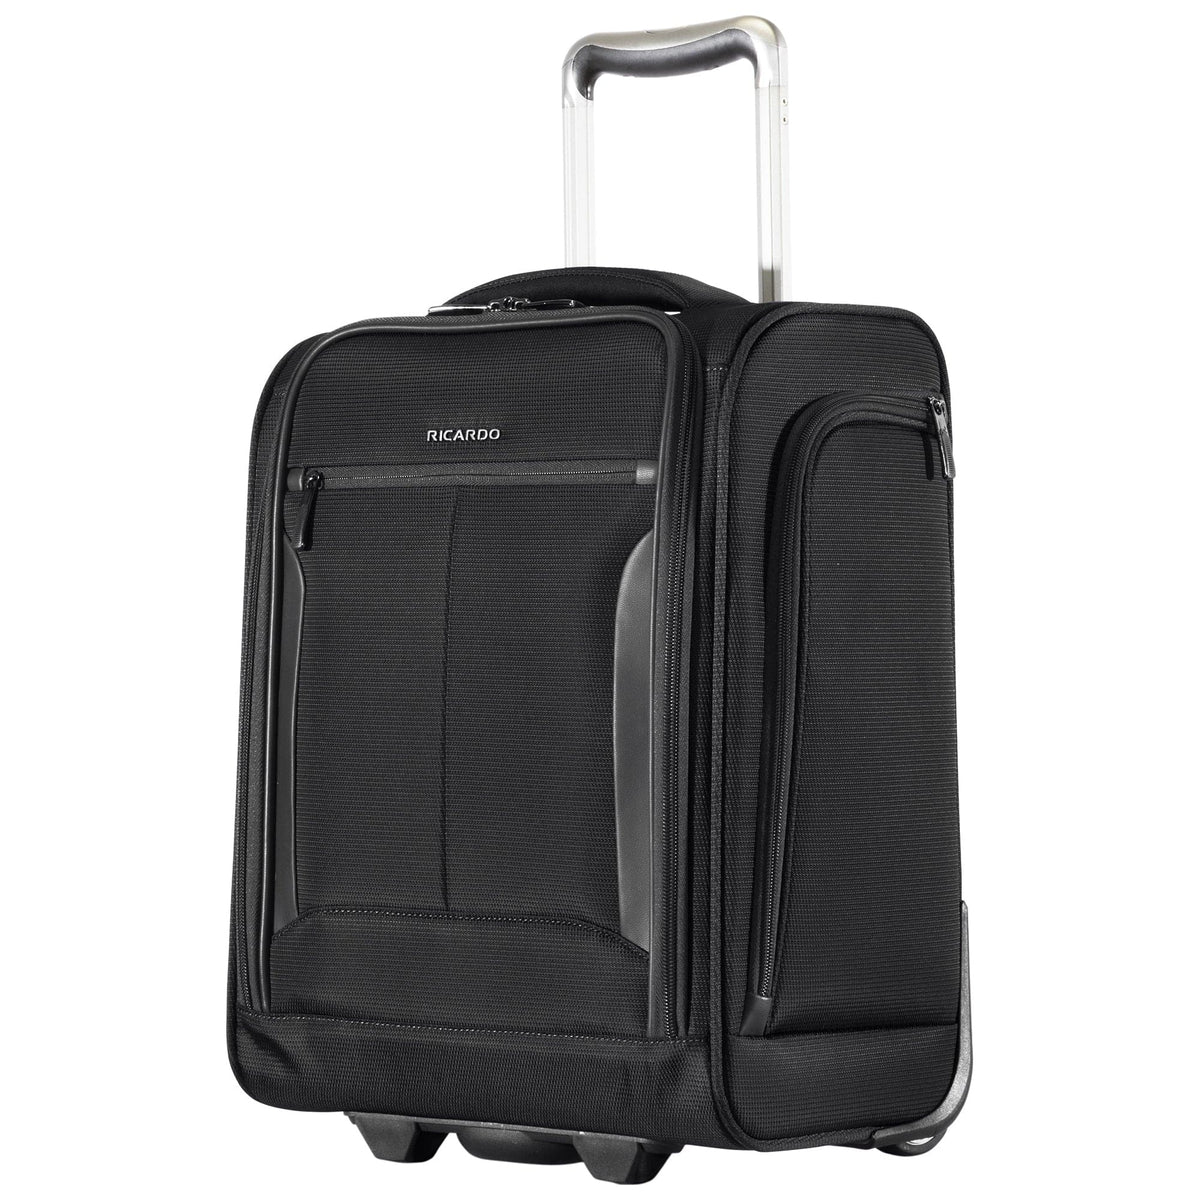 Ricardo Beverly Hills Seahaven 2.0 Softside Underseat Carry-On Luggage